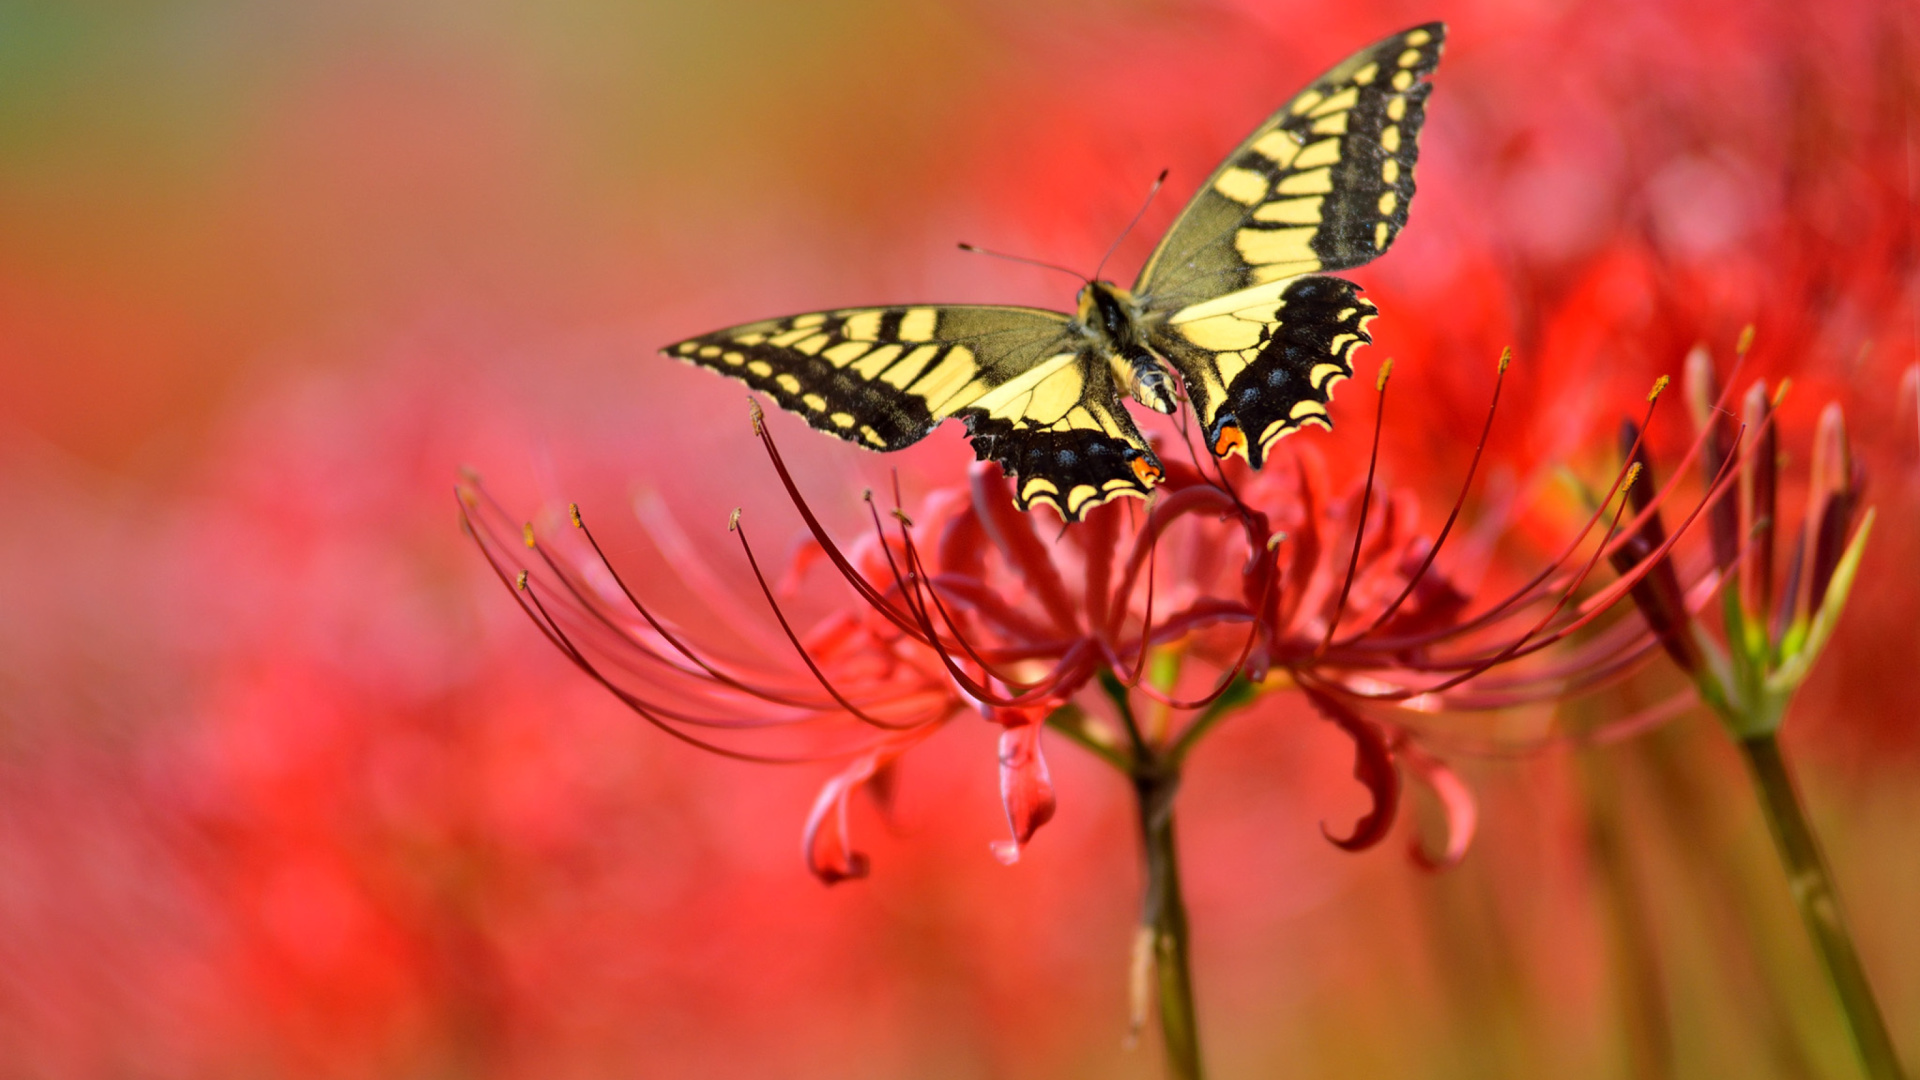 Macro Butterfly and Red Flower wallpaper 1920x1080